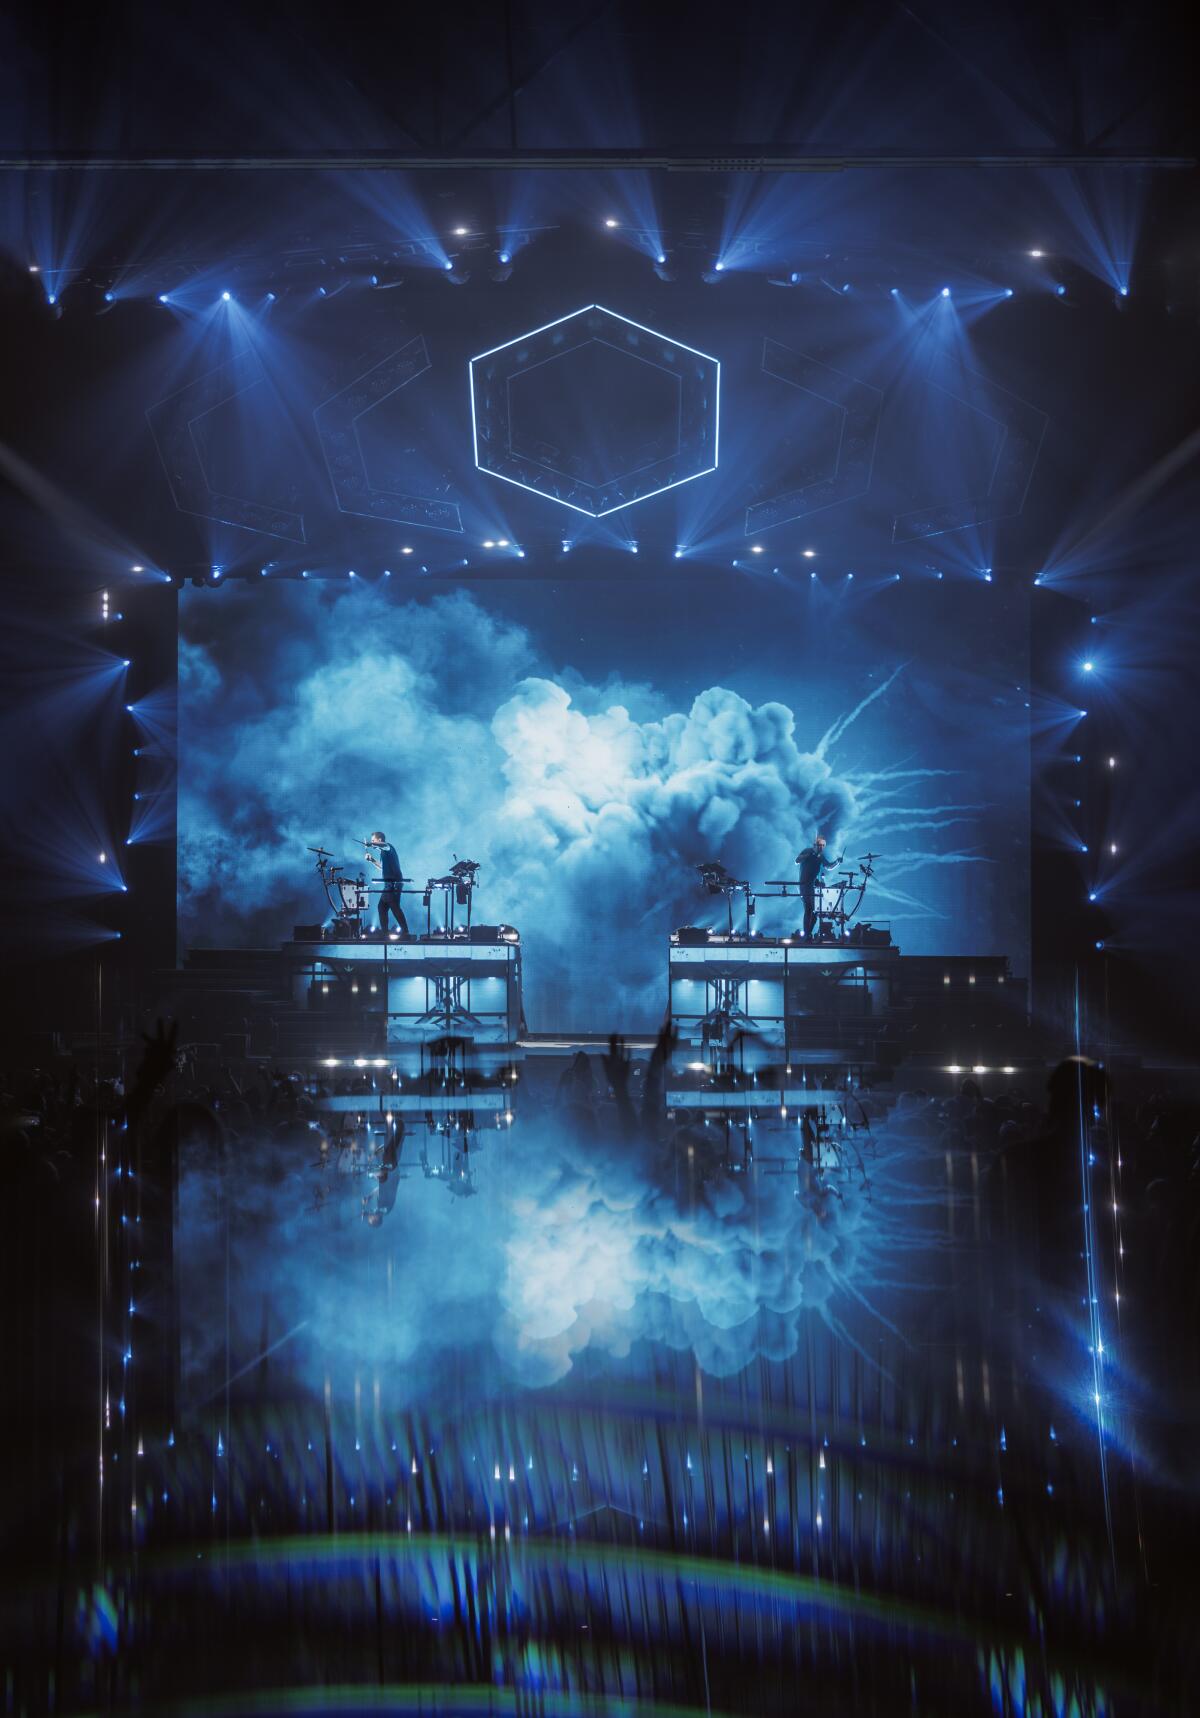 Odesza performing on a large stage surrounded by blue light